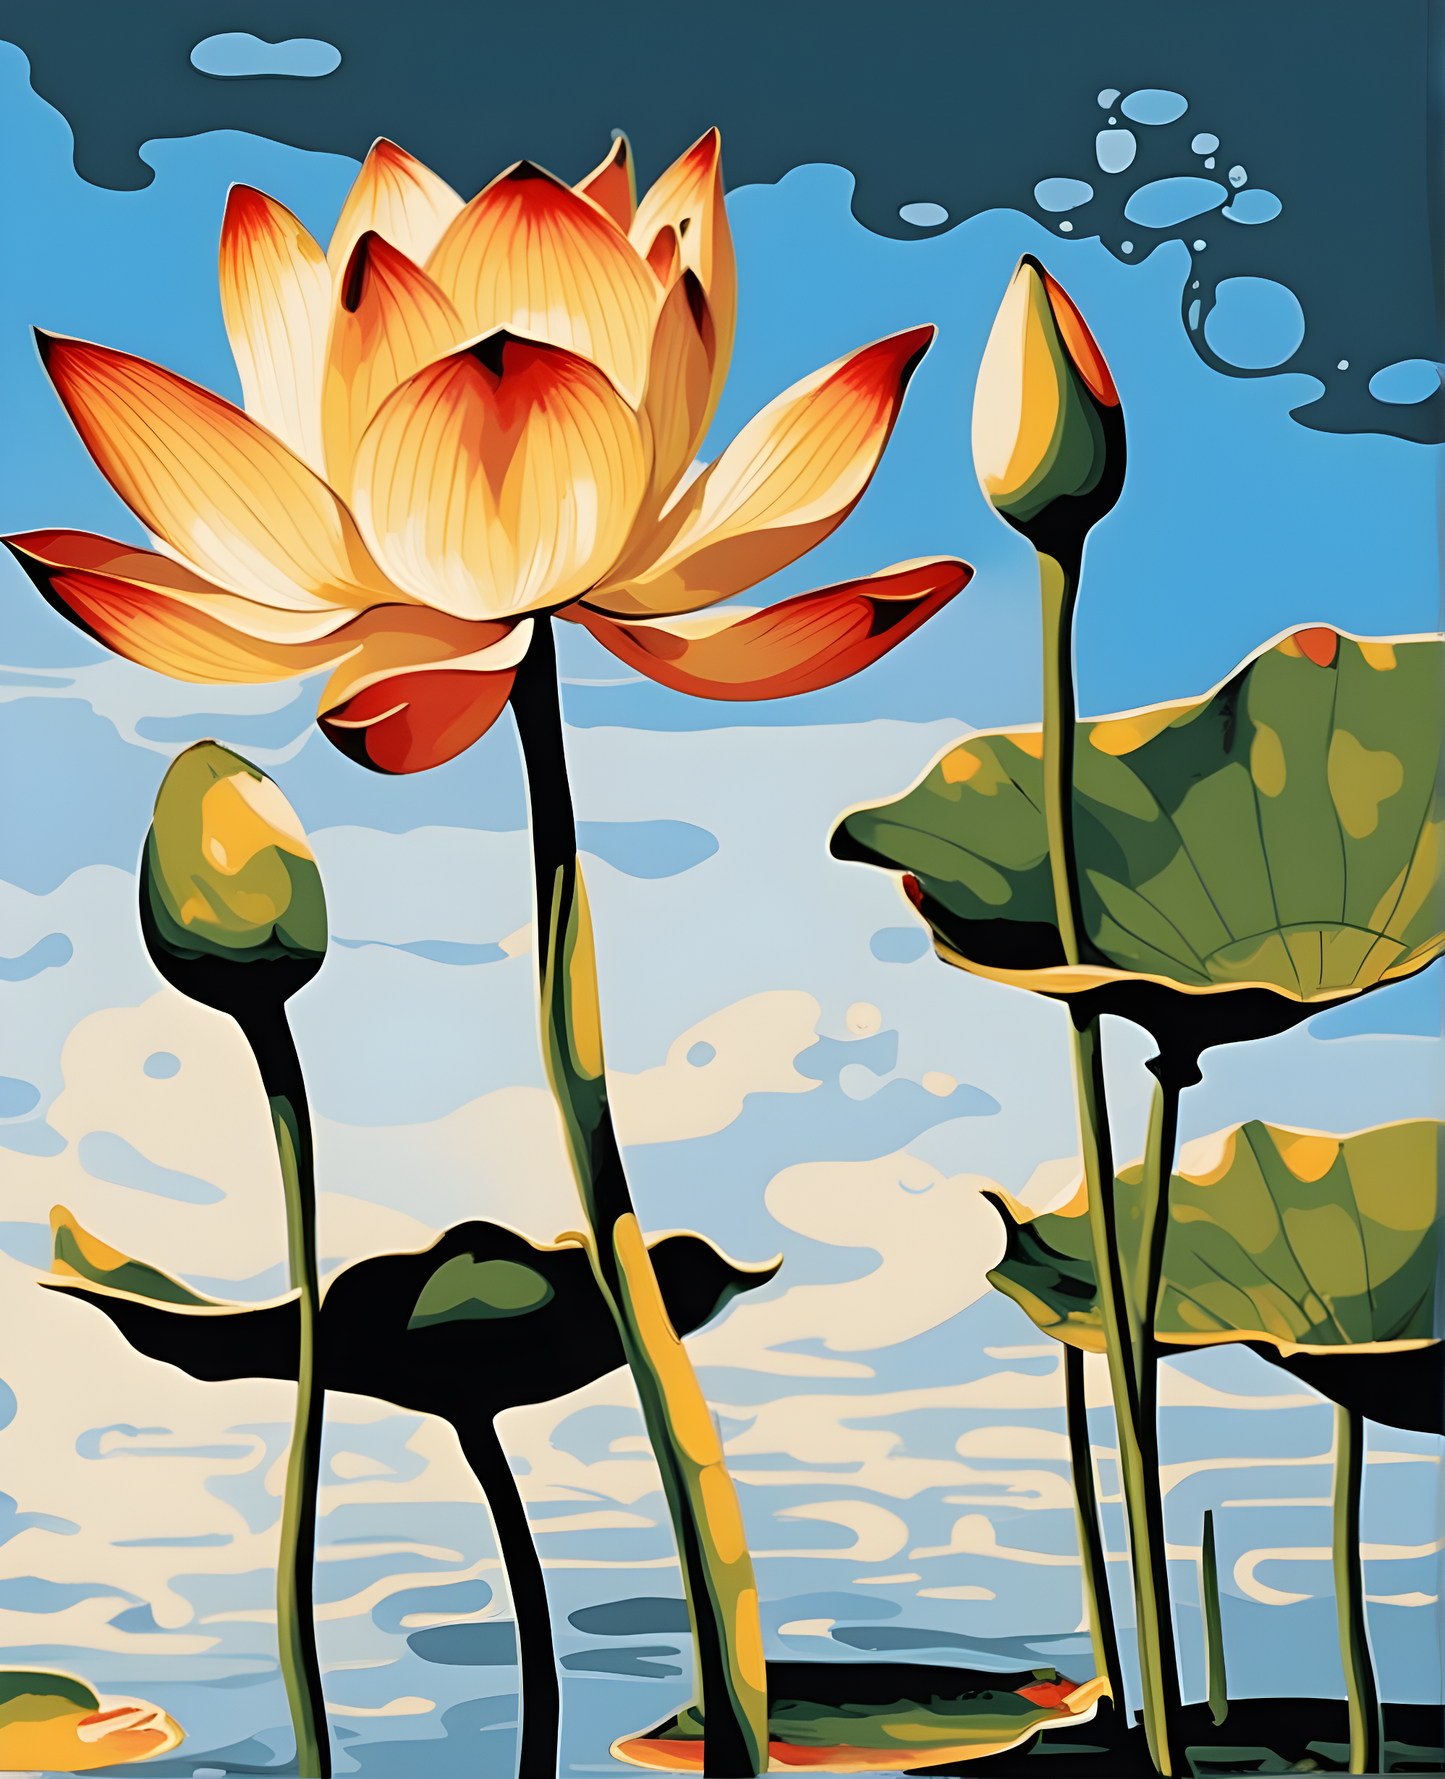 Flowers Collection OD (75) - Lotus - Van-Go Paint-By-Number Kit